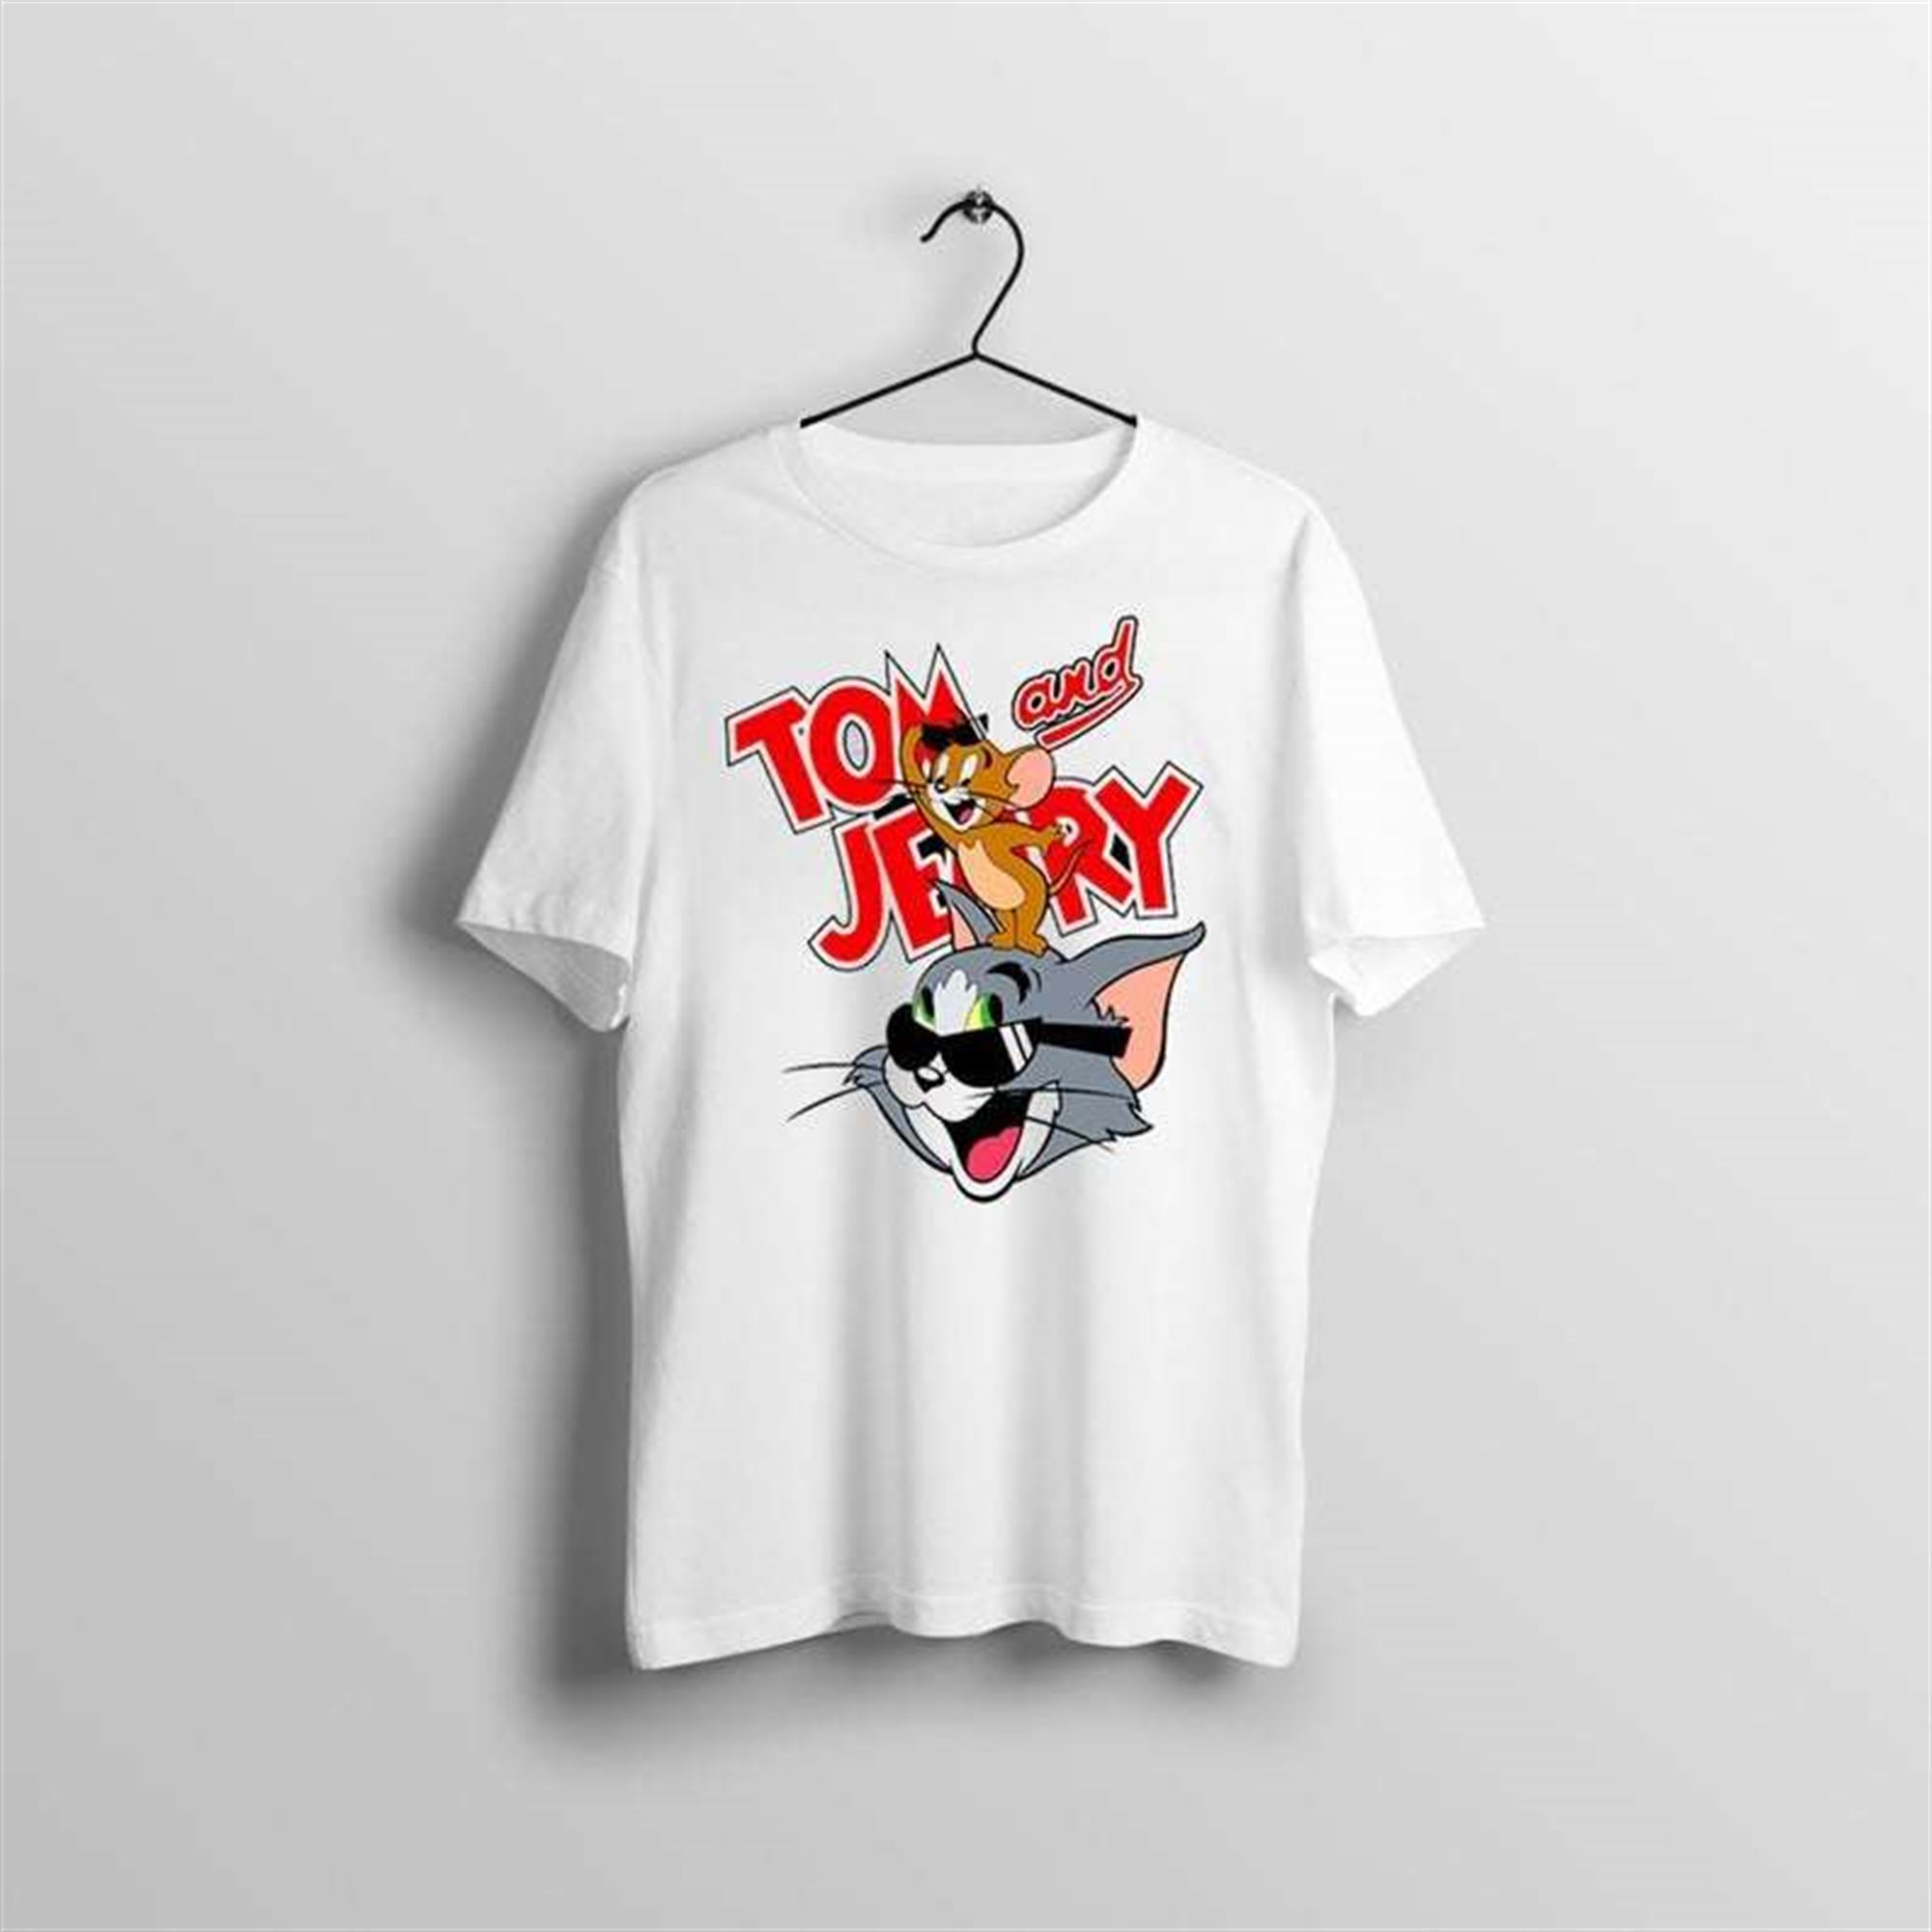 Tom And Jerry 2021 Summer T Shirt Size Up To 5xl